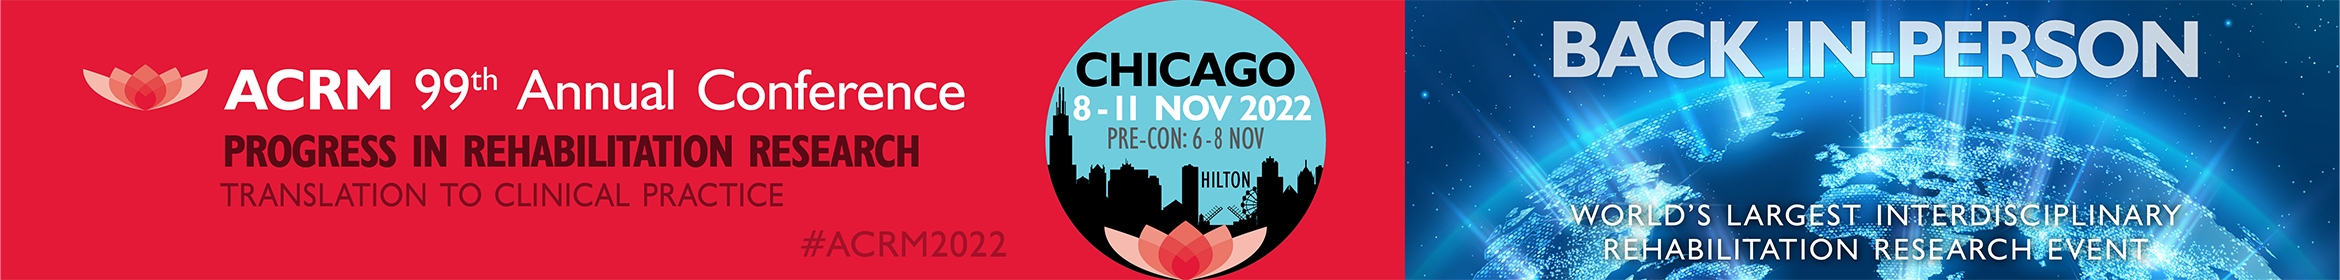 2022 ACRM Annual Conference Main banner